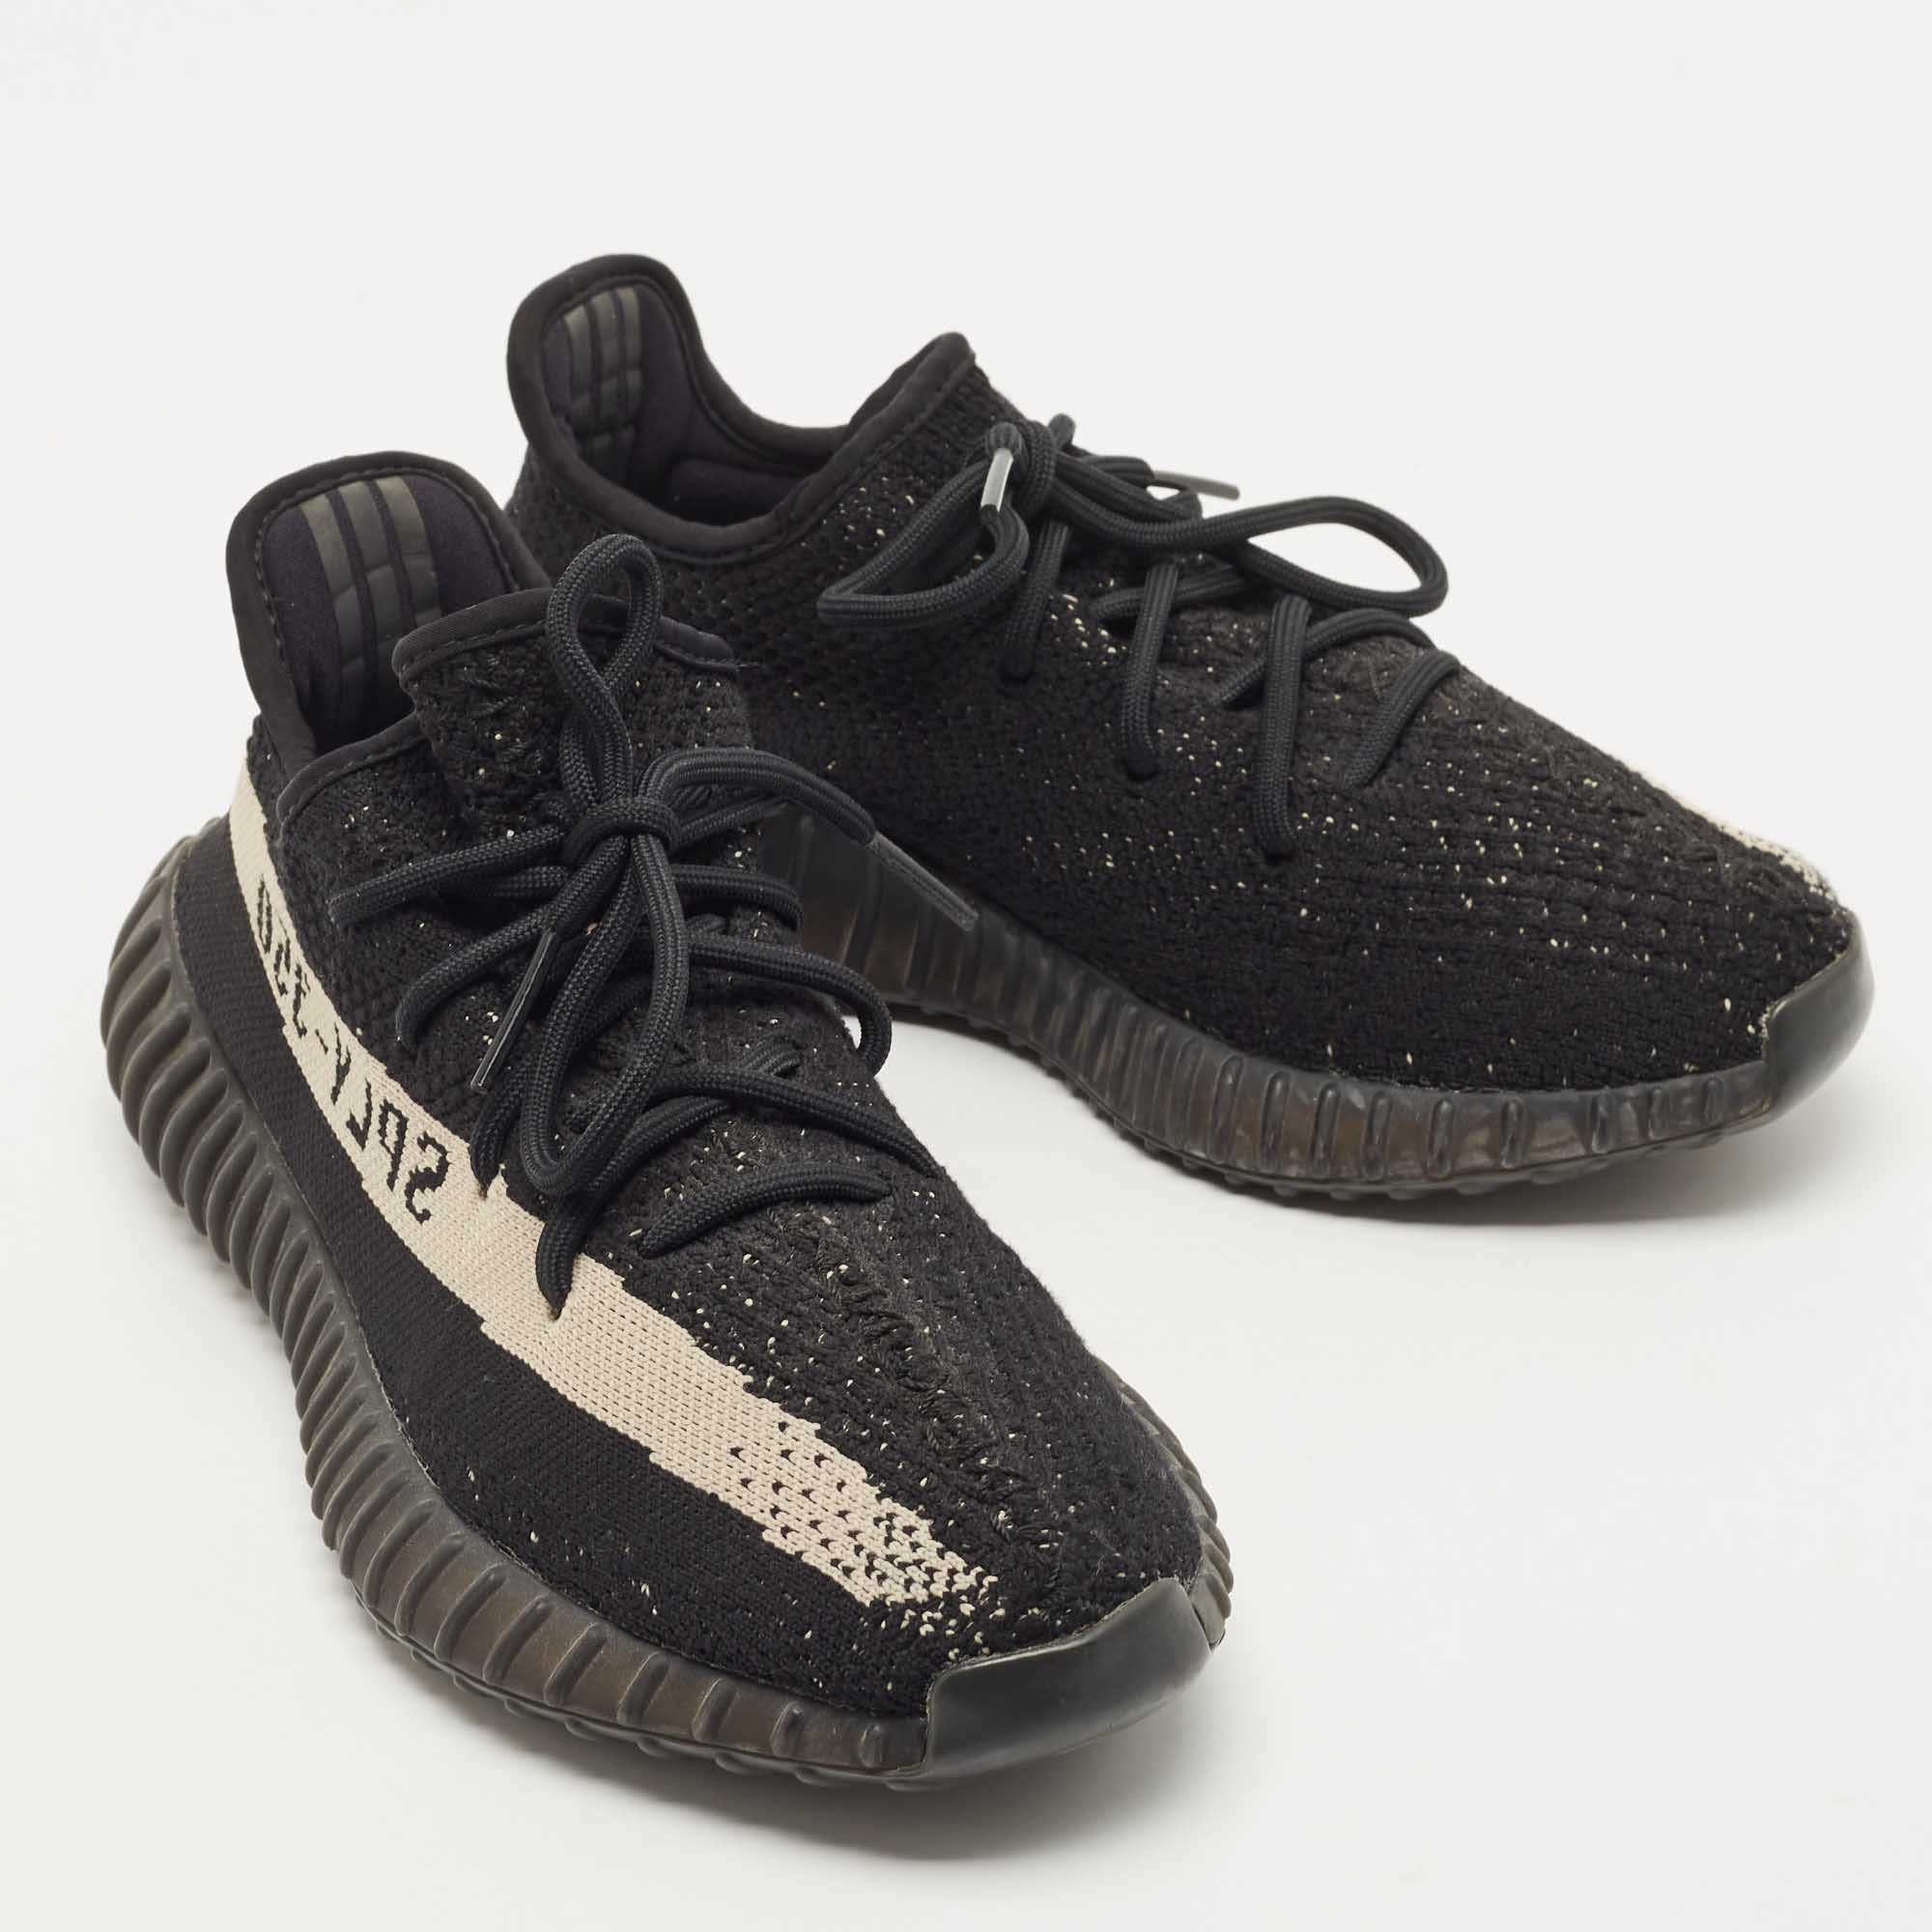 Yeezy X Adidas Black Knit Fabric Boost 350 V2 Oreo Sneakers Size 40